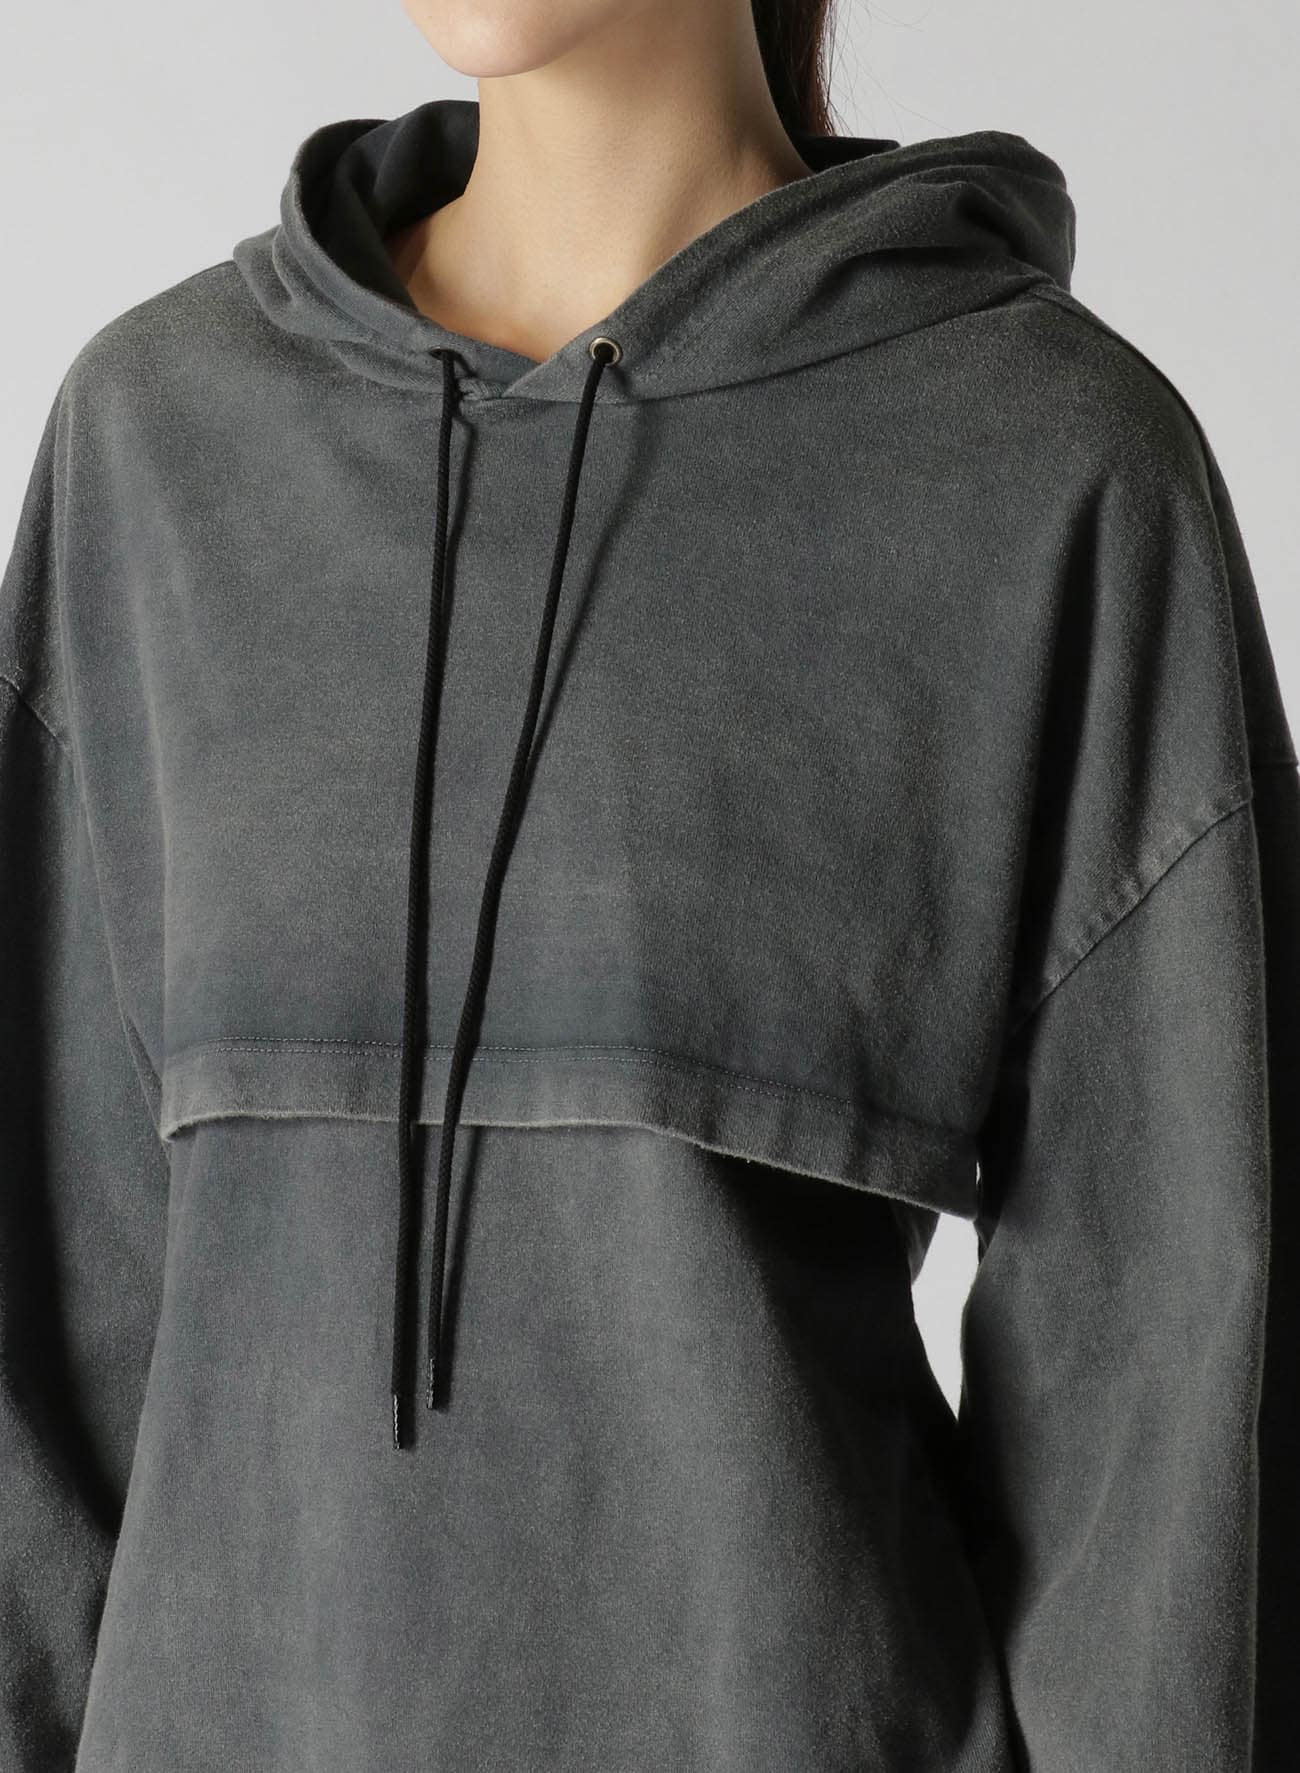 SULFIDE DYED COTTON JERSEY LAYERED SEPARATE HOODIE